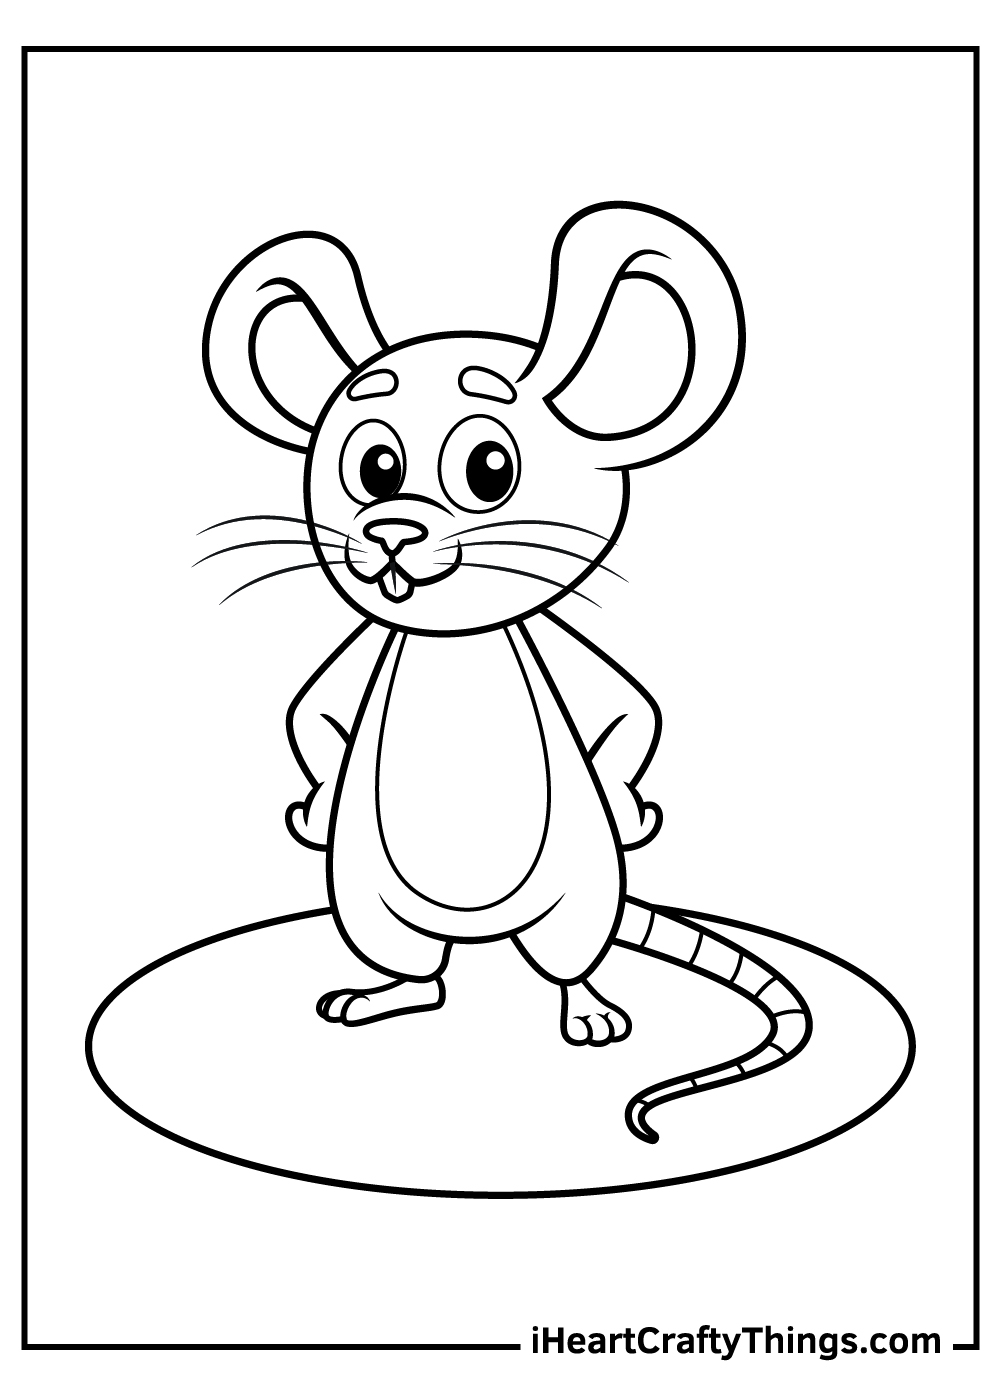 Mouse coloring pages free printables